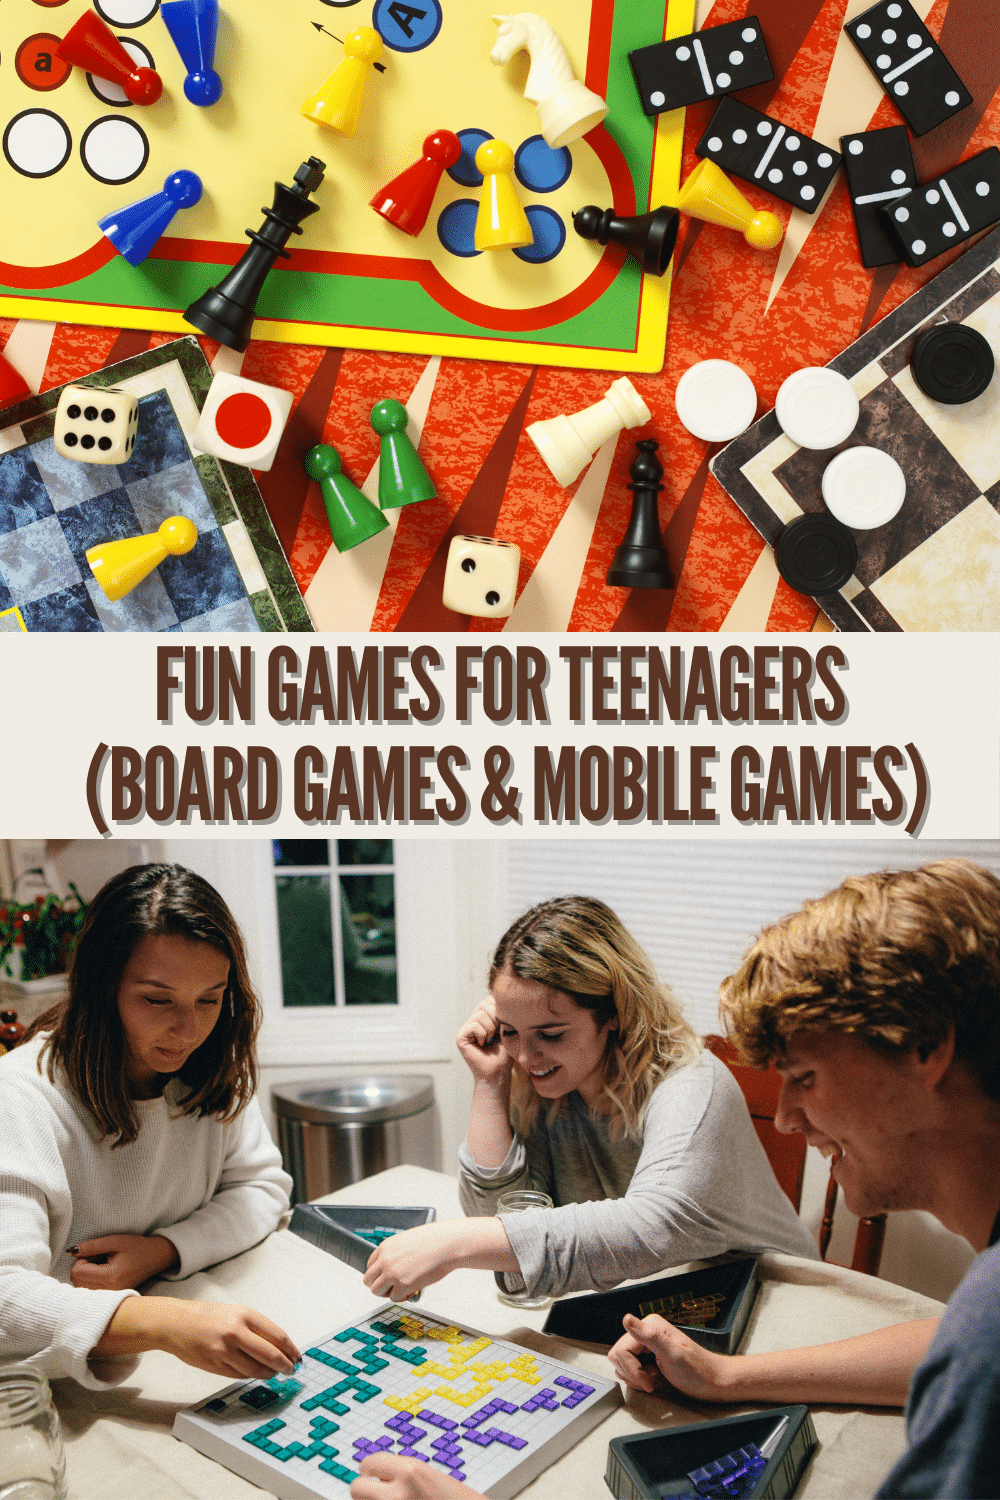 It's not impossible to keep a group of teens entertained in a way that moms approve. These games all get mom AND teens stamp of approval. #teens #games #boardgames #mobilegames via @wondermomwannab